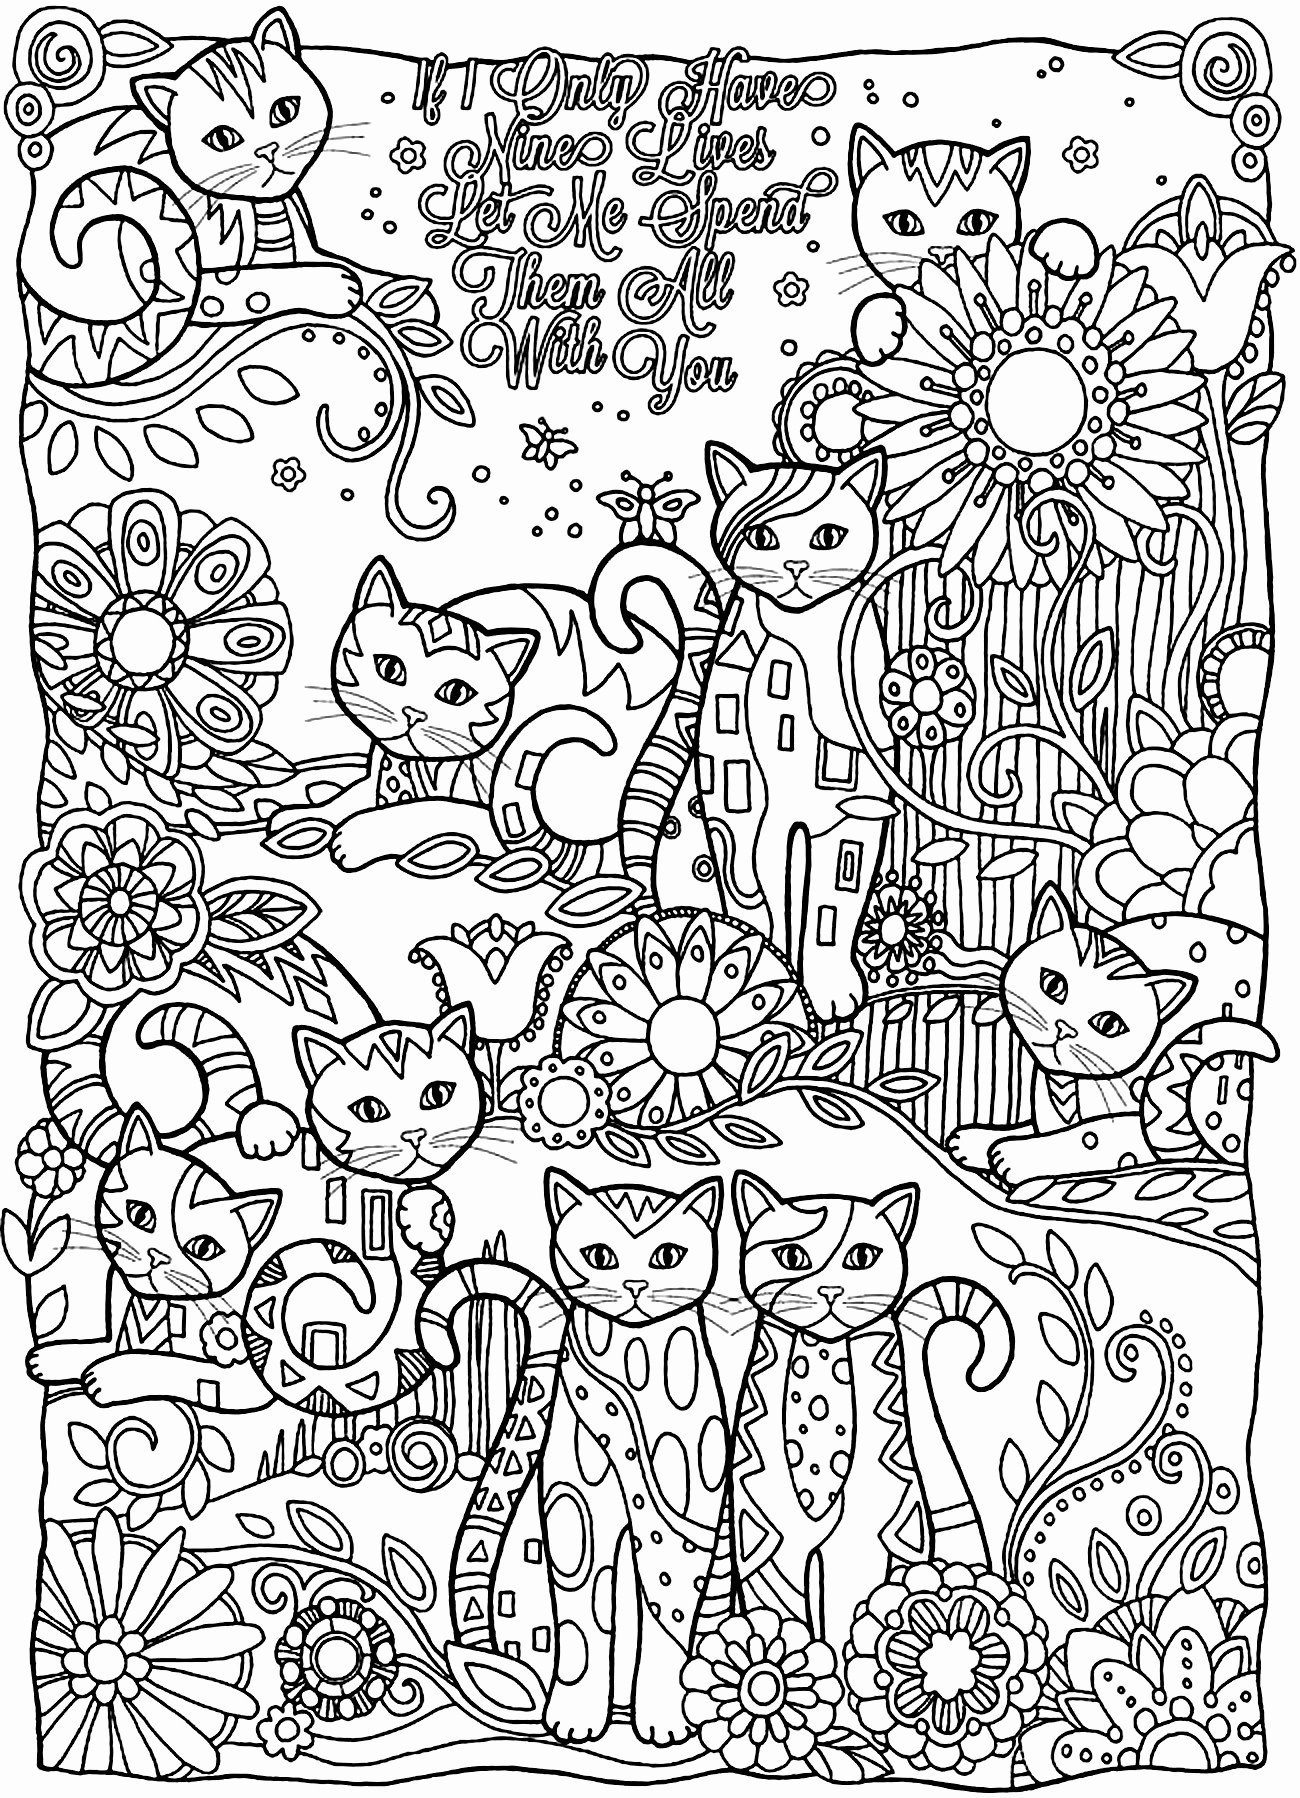 Free Bird Coloring Pages Awesome Best Od Dog Coloring Pages Free dinosaur